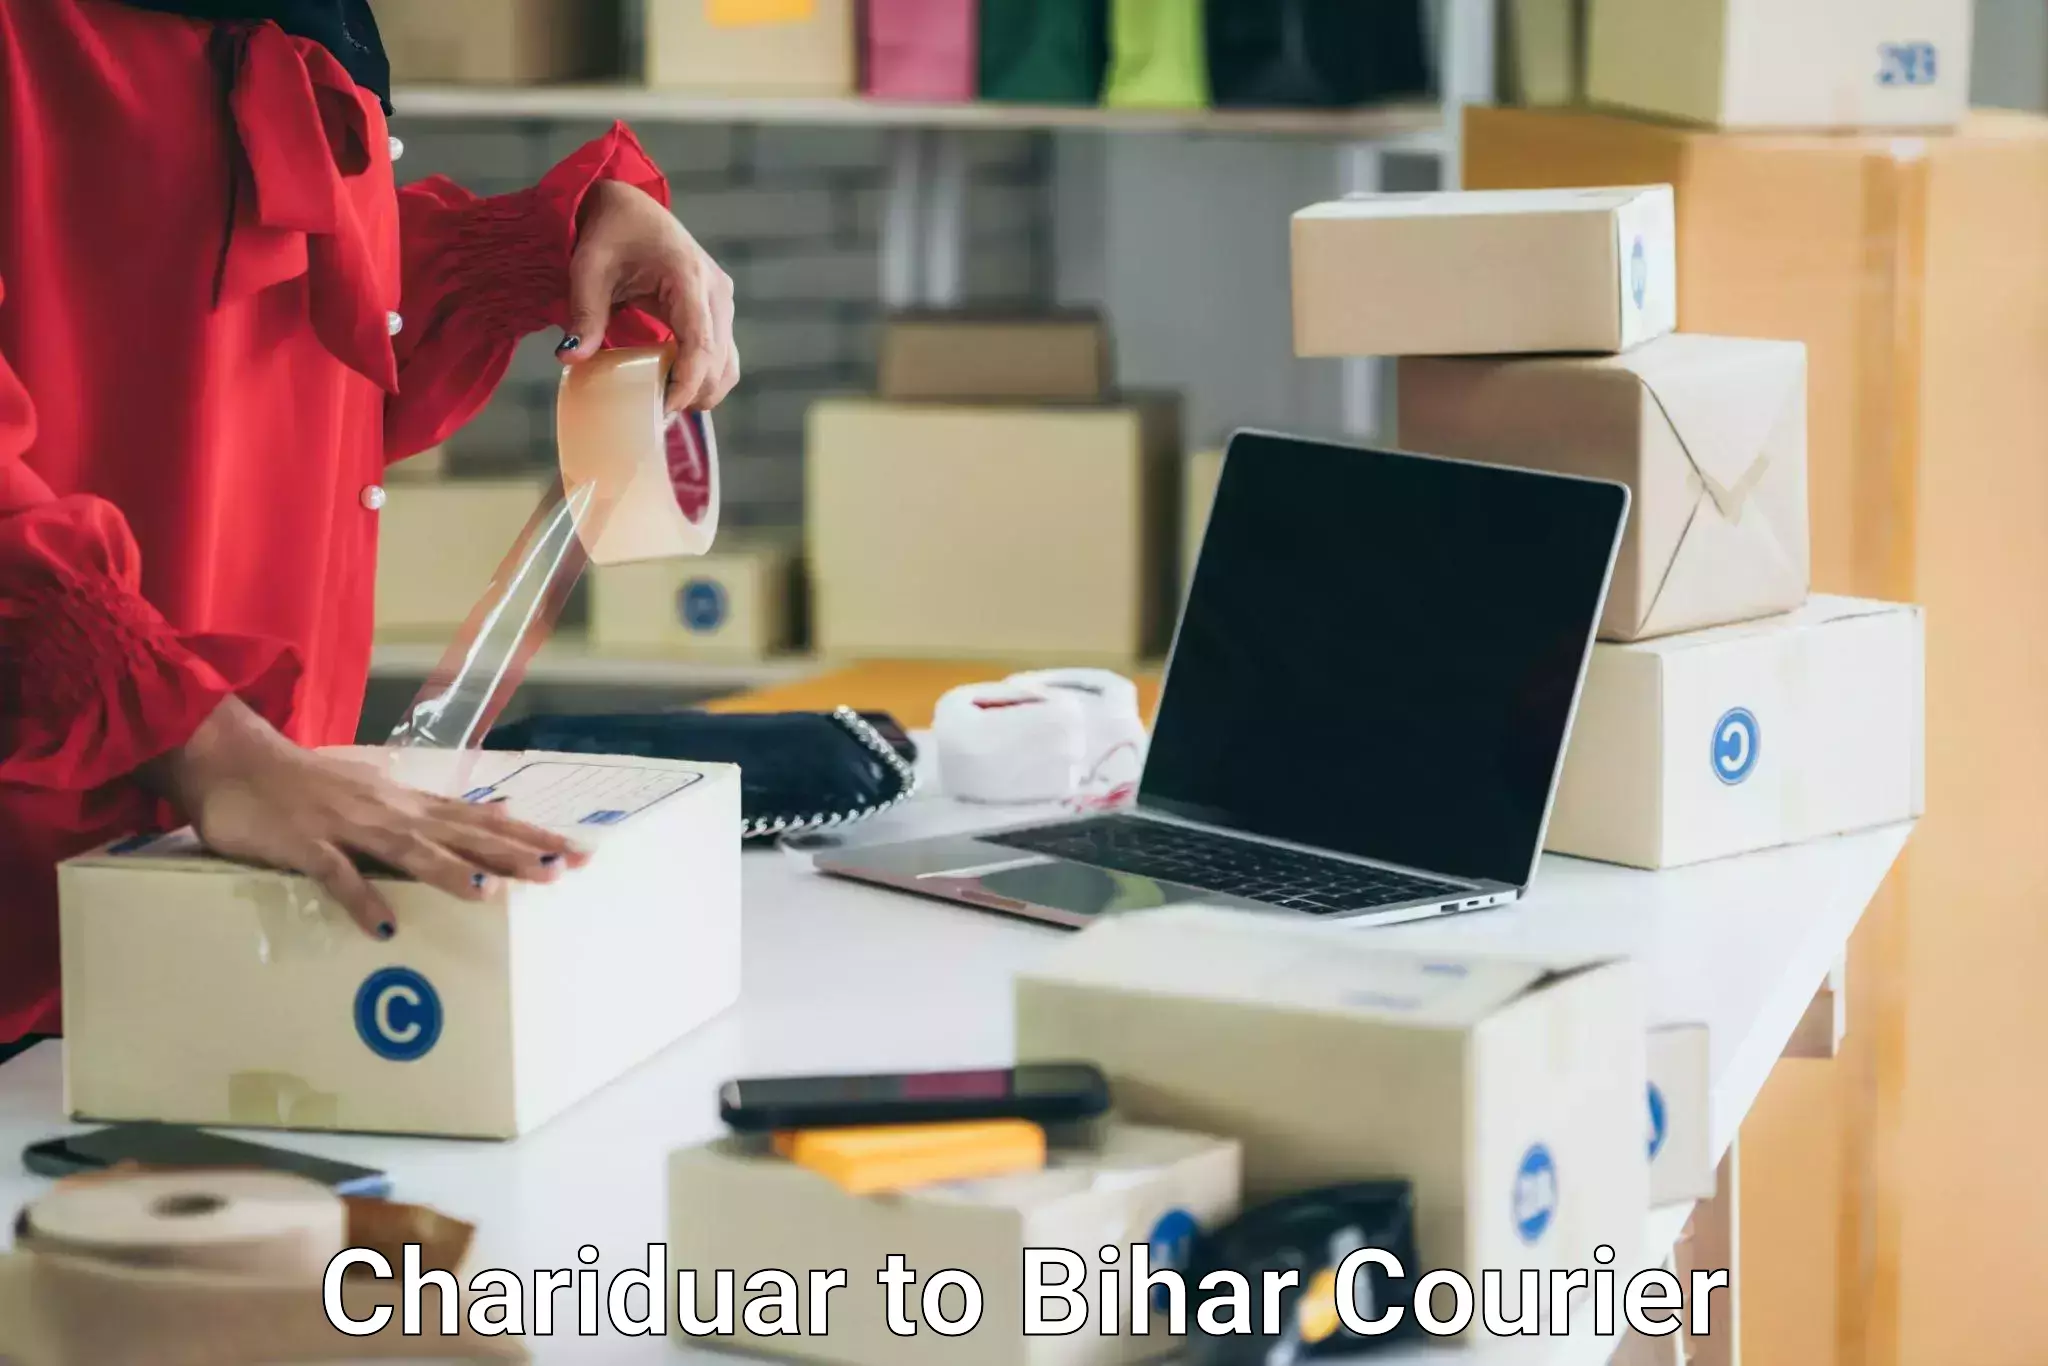 Residential moving experts Chariduar to Bhorey